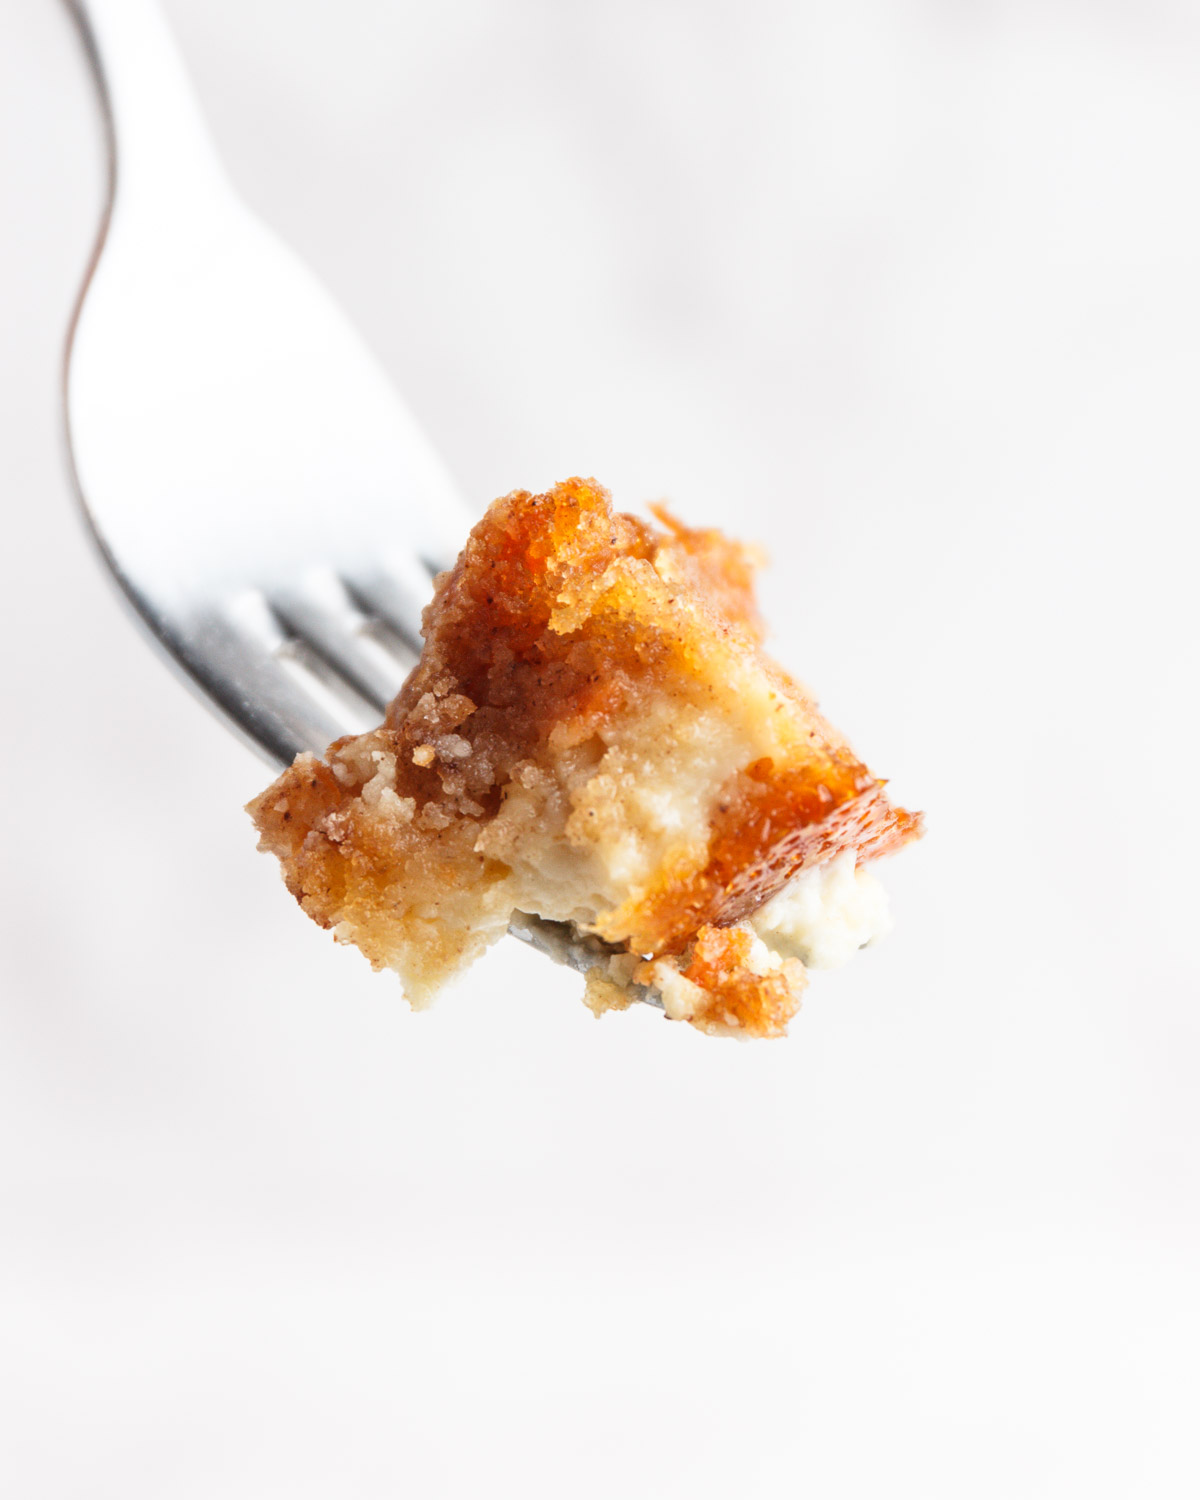 A bite of low carb carrot coffee cake with cream cheese on a fork.